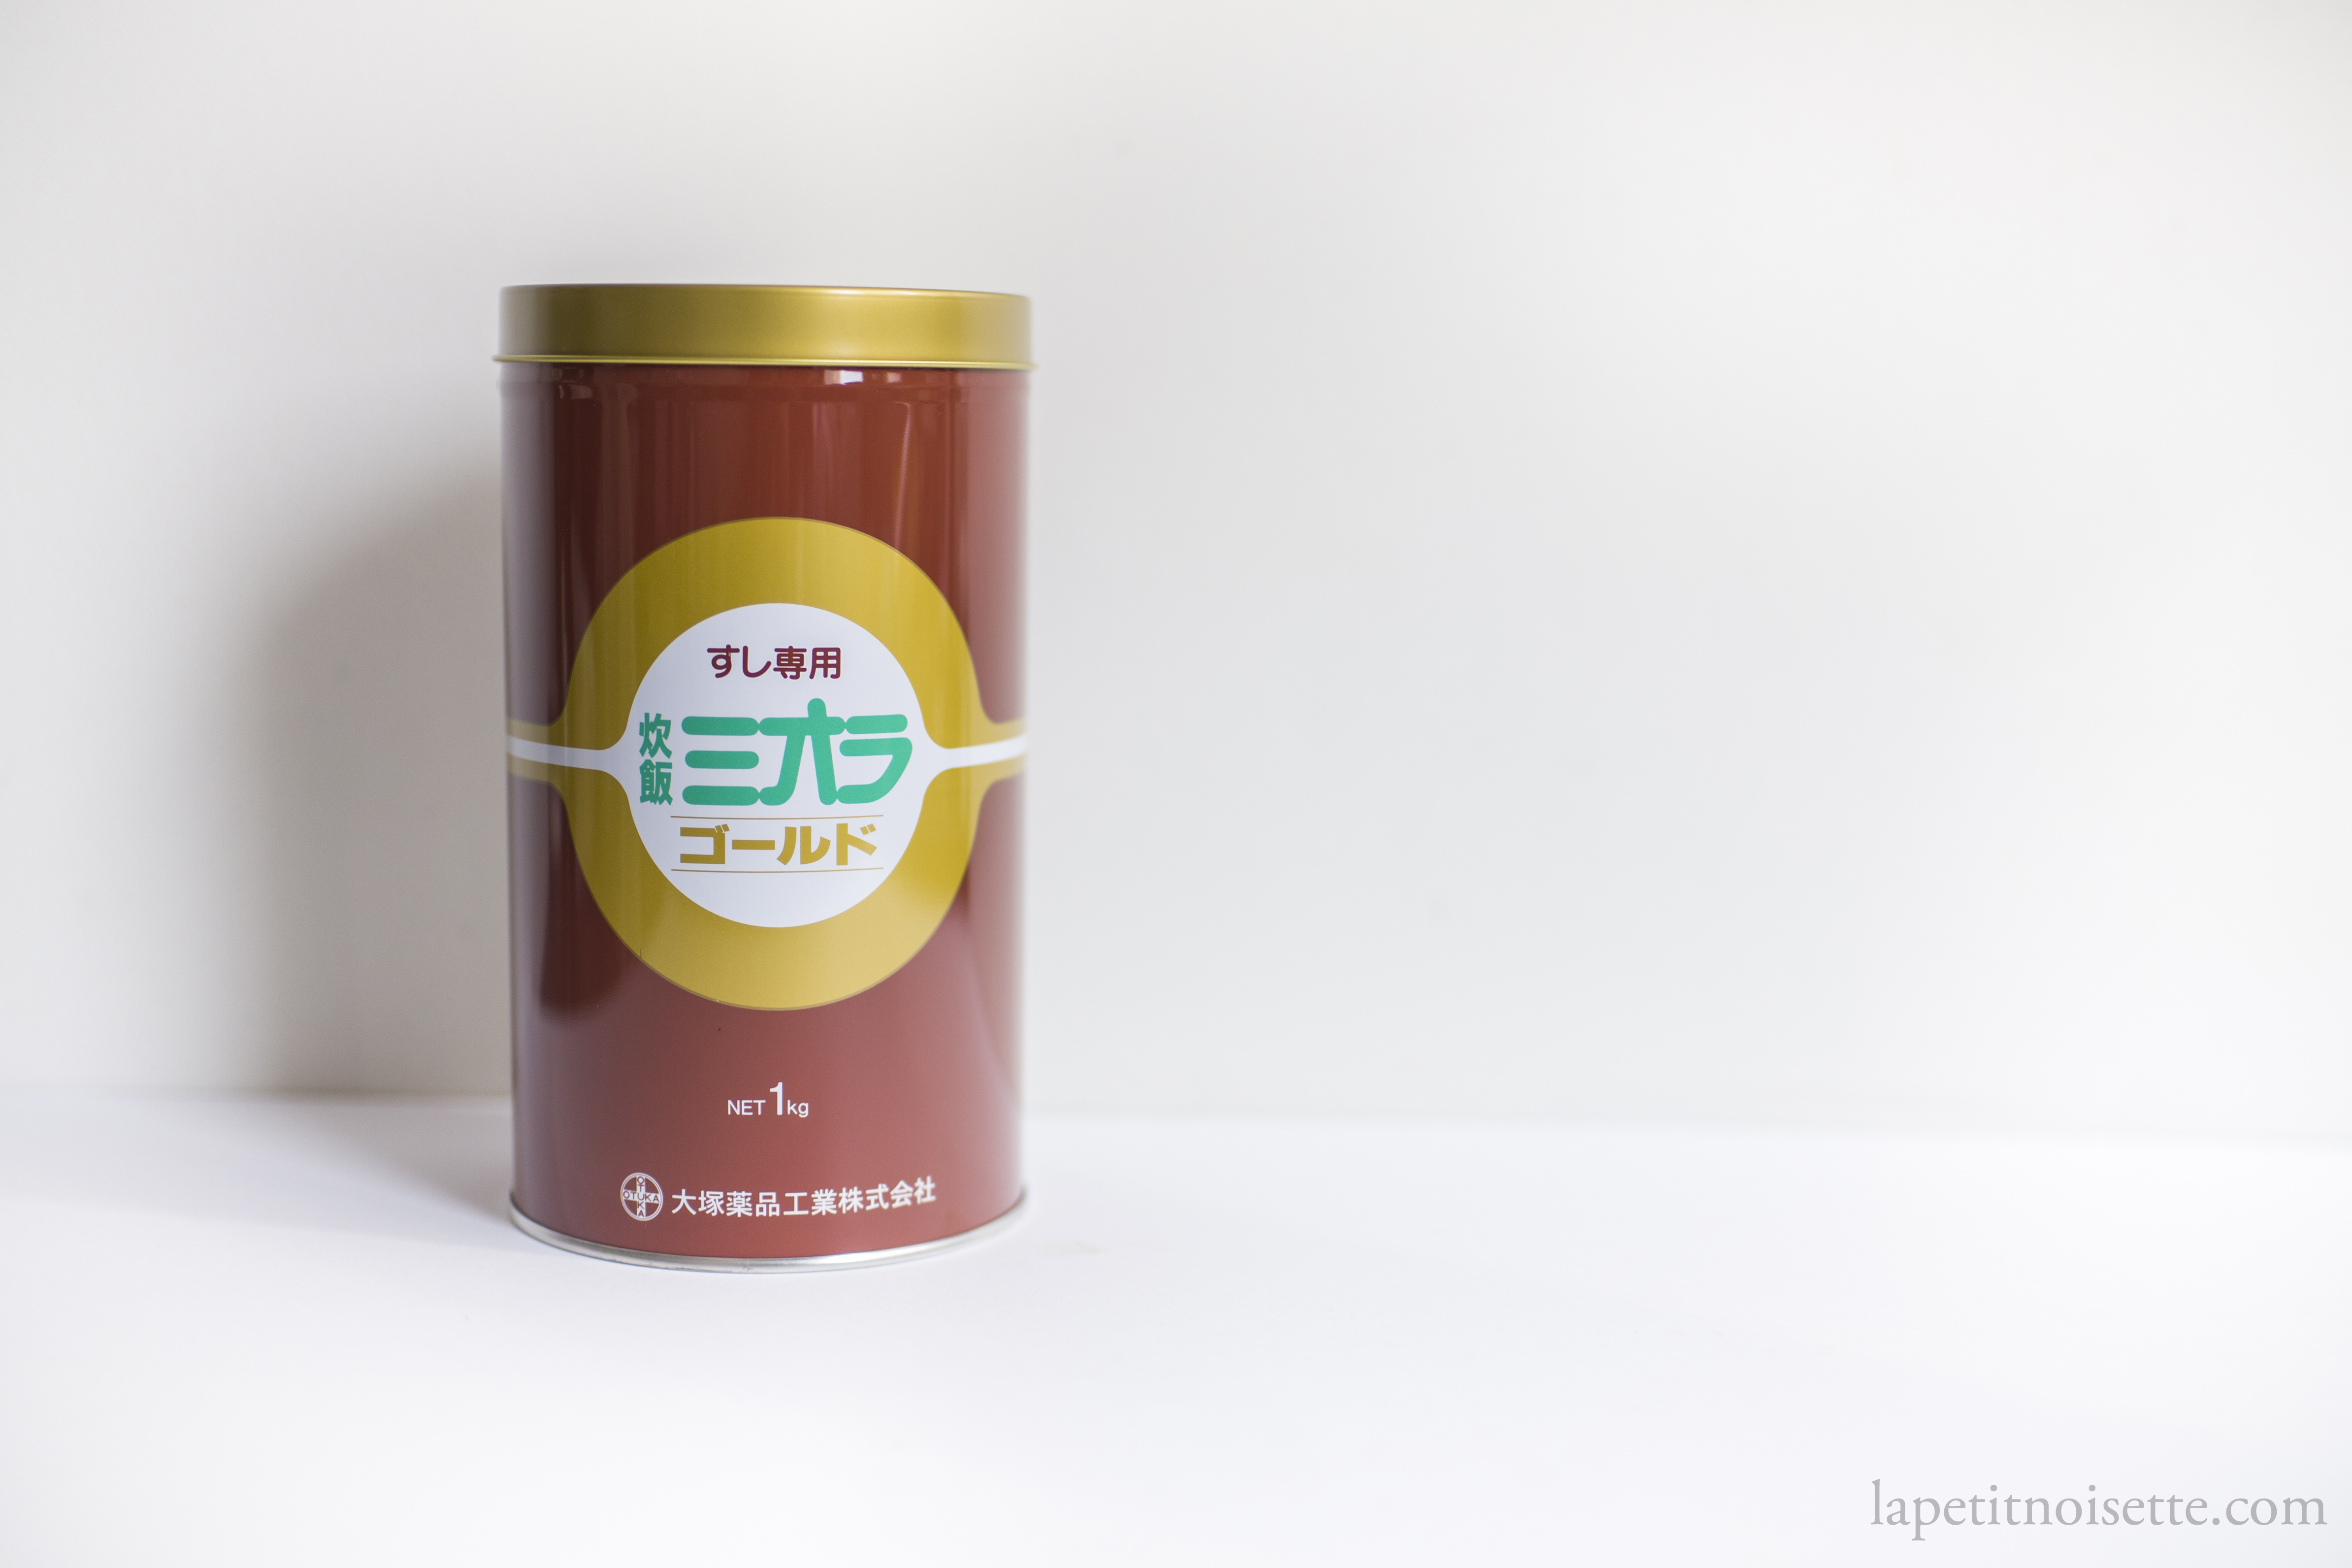 A can of Japanese sushi rice improver known as Otuka Miola.